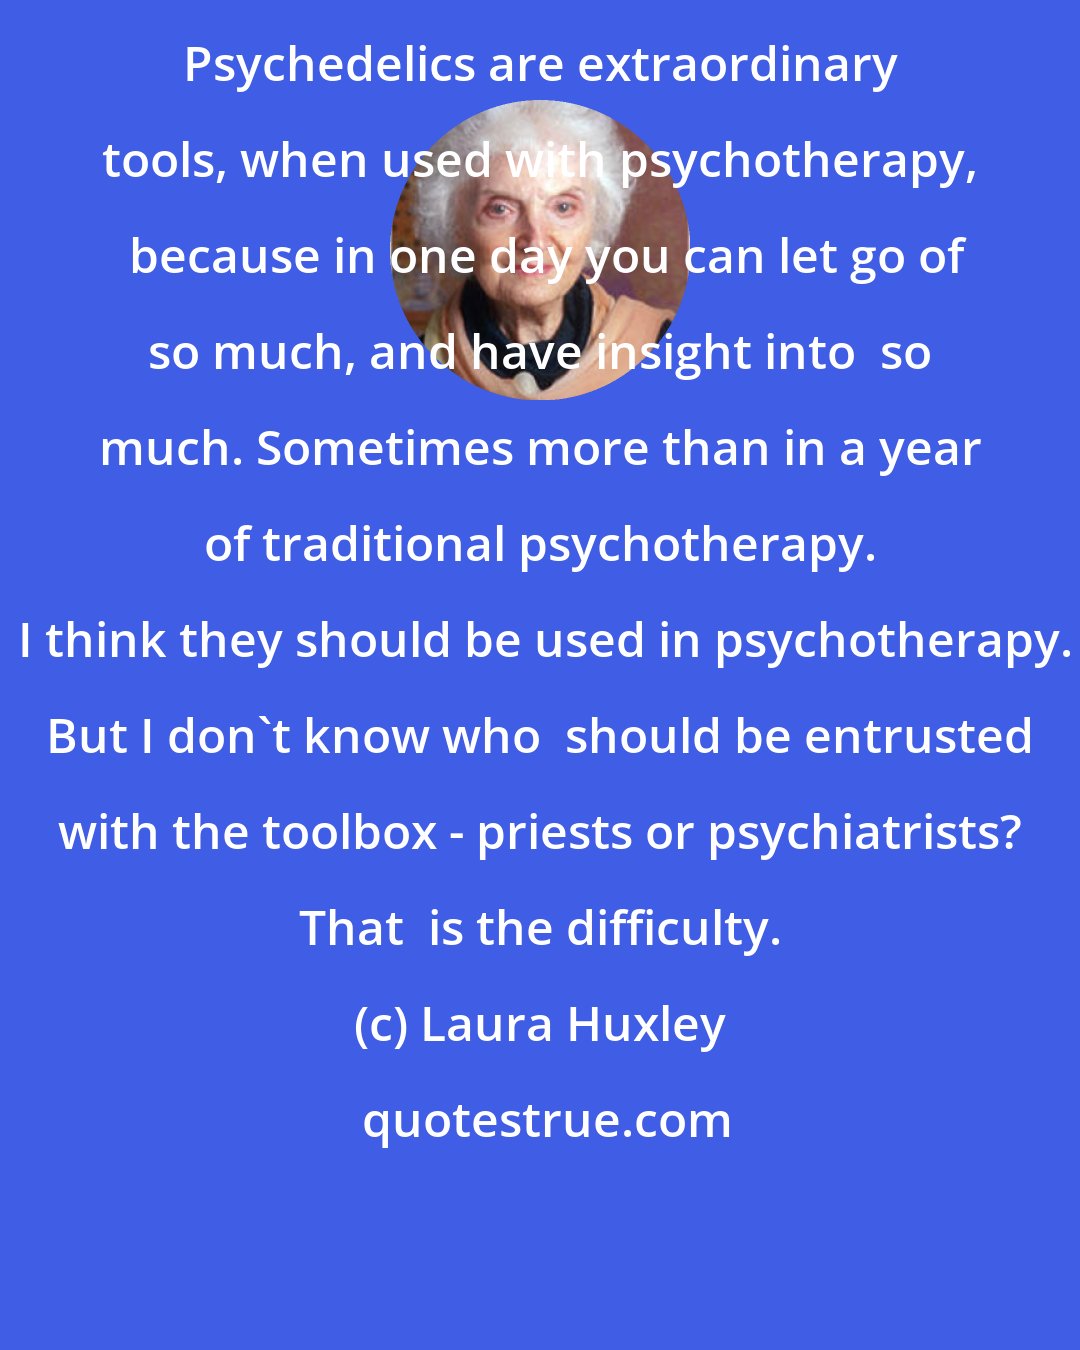 Laura Huxley: Psychedelics are extraordinary tools, when used with psychotherapy,  because in one day you can let go of so much, and have insight into  so much. Sometimes more than in a year of traditional psychotherapy.  I think they should be used in psychotherapy. But I don't know who  should be entrusted with the toolbox - priests or psychiatrists? That  is the difficulty.